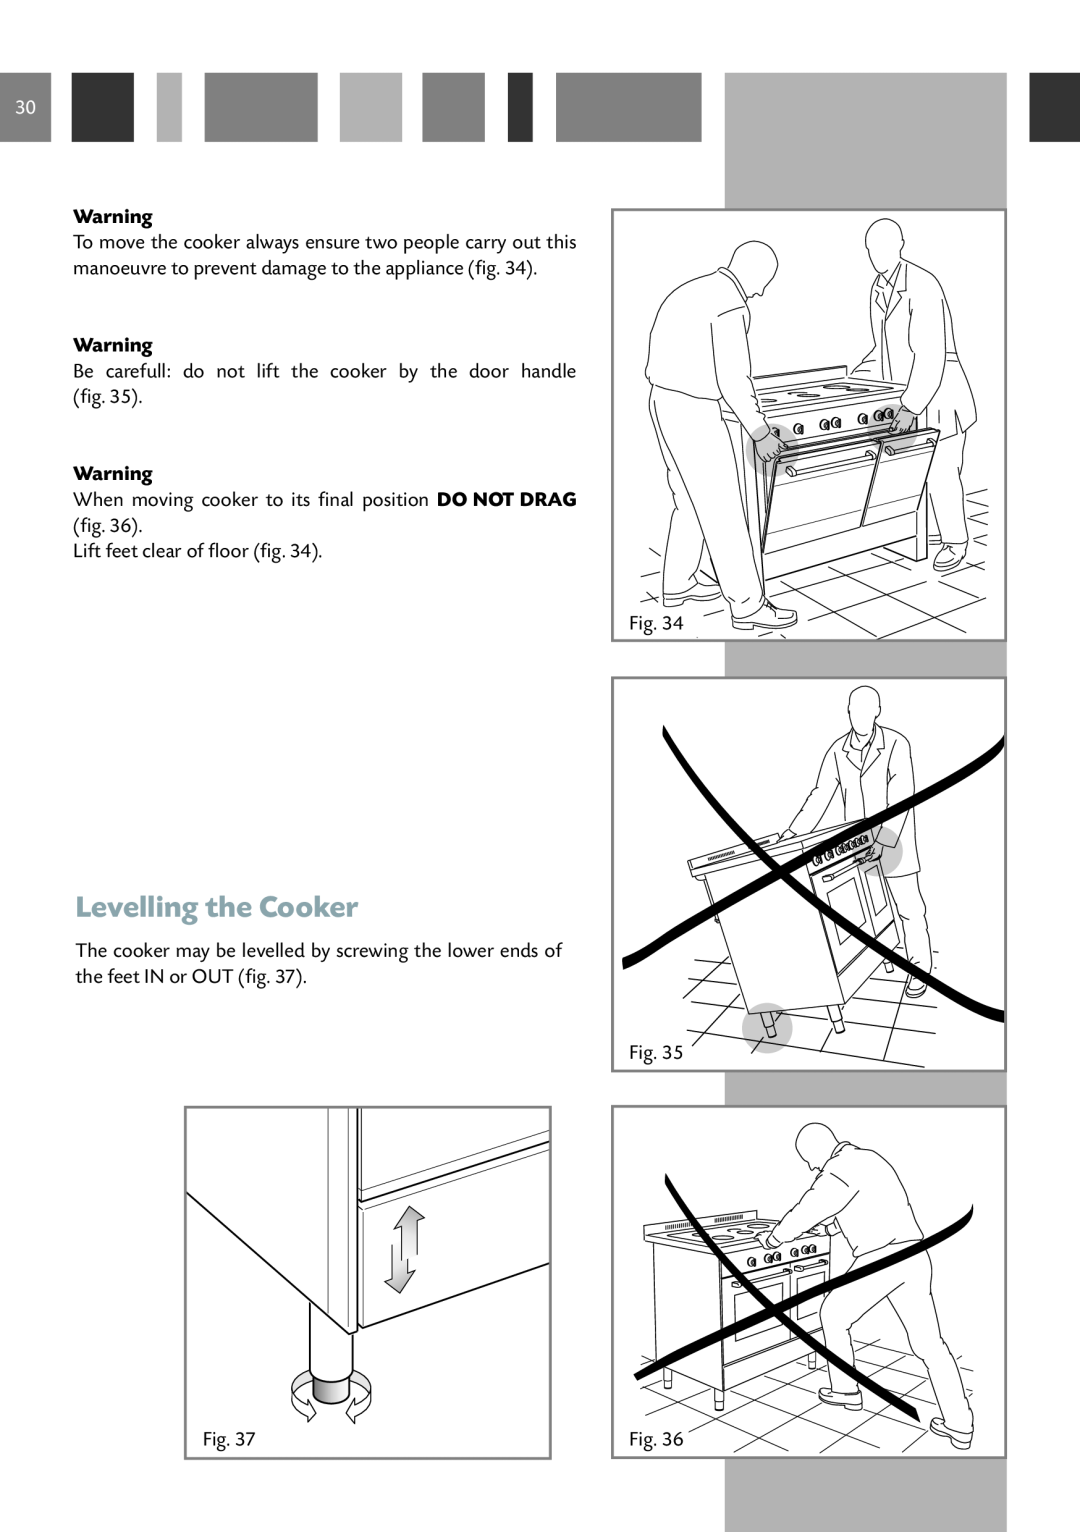 CDA RC 9620 manual Levelling the Cooker, Be carefull do not lift the cooker by the door handle, Lift feet clear of floor 